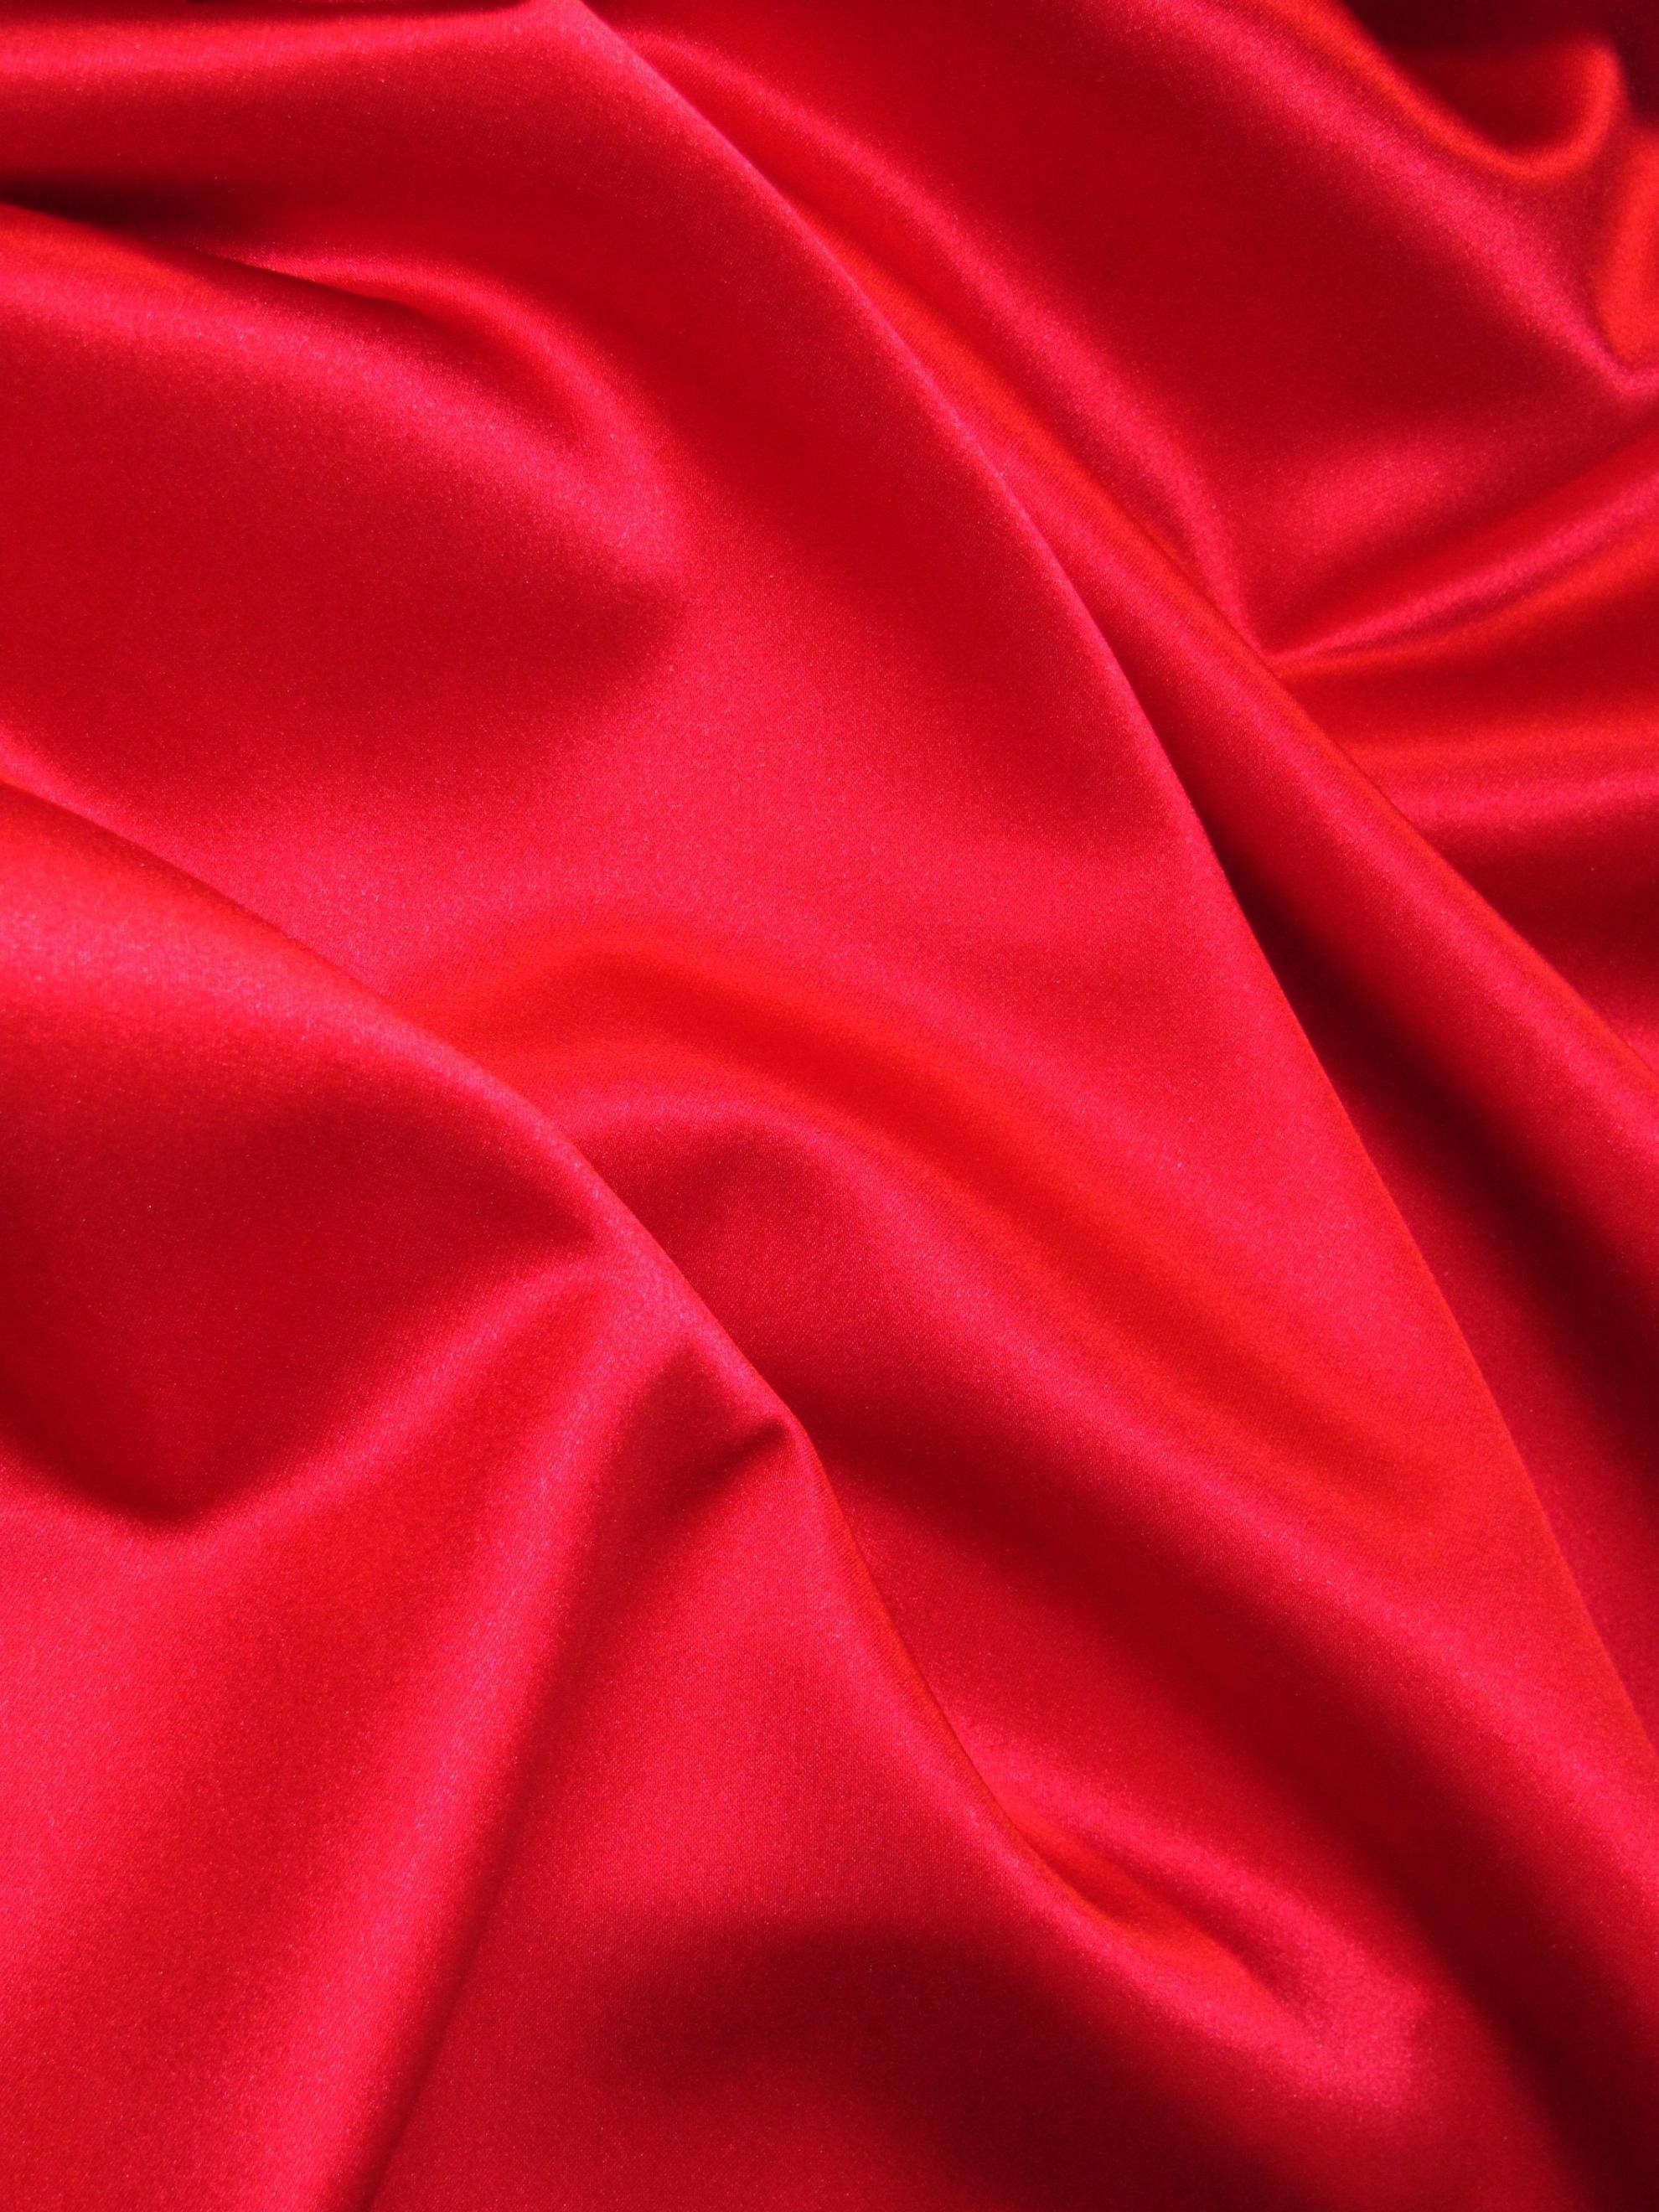 Red satin wallpaper, Elegant design, High-resolution pictures, Classic, 1980x2640 HD Phone